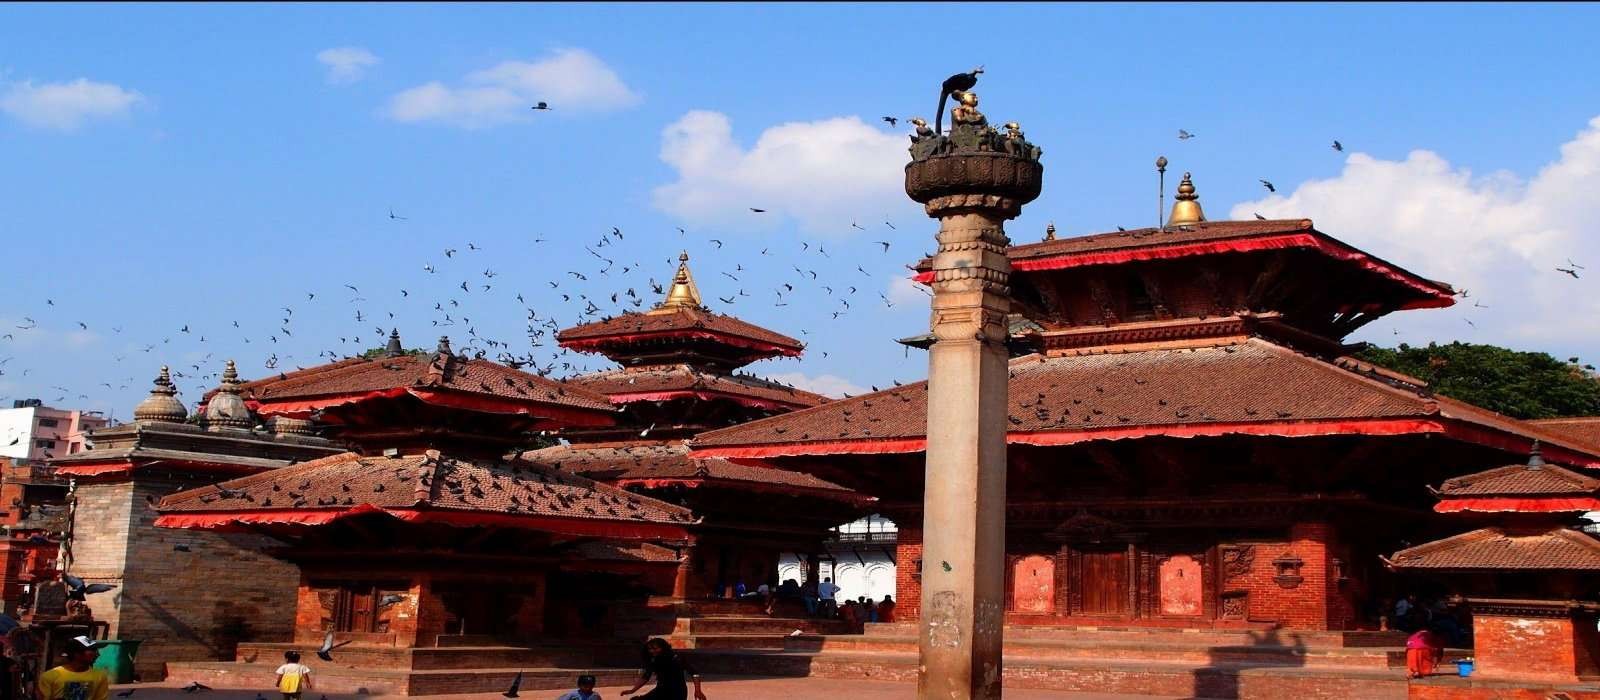 Best Place To Visit In Nepal